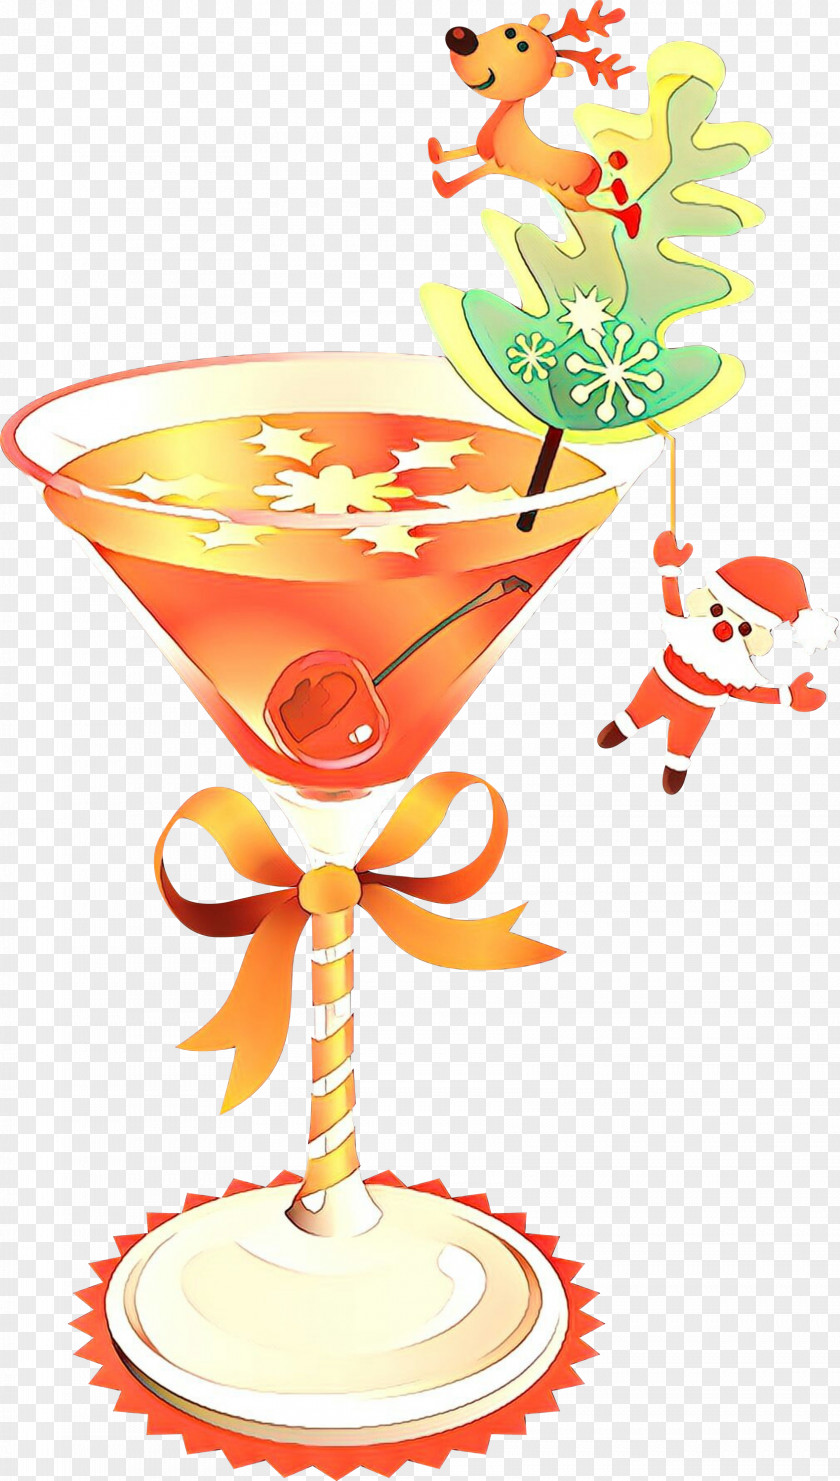 Martini Glass Cocktail Garnish Drink Non-alcoholic Beverage Drinkware PNG